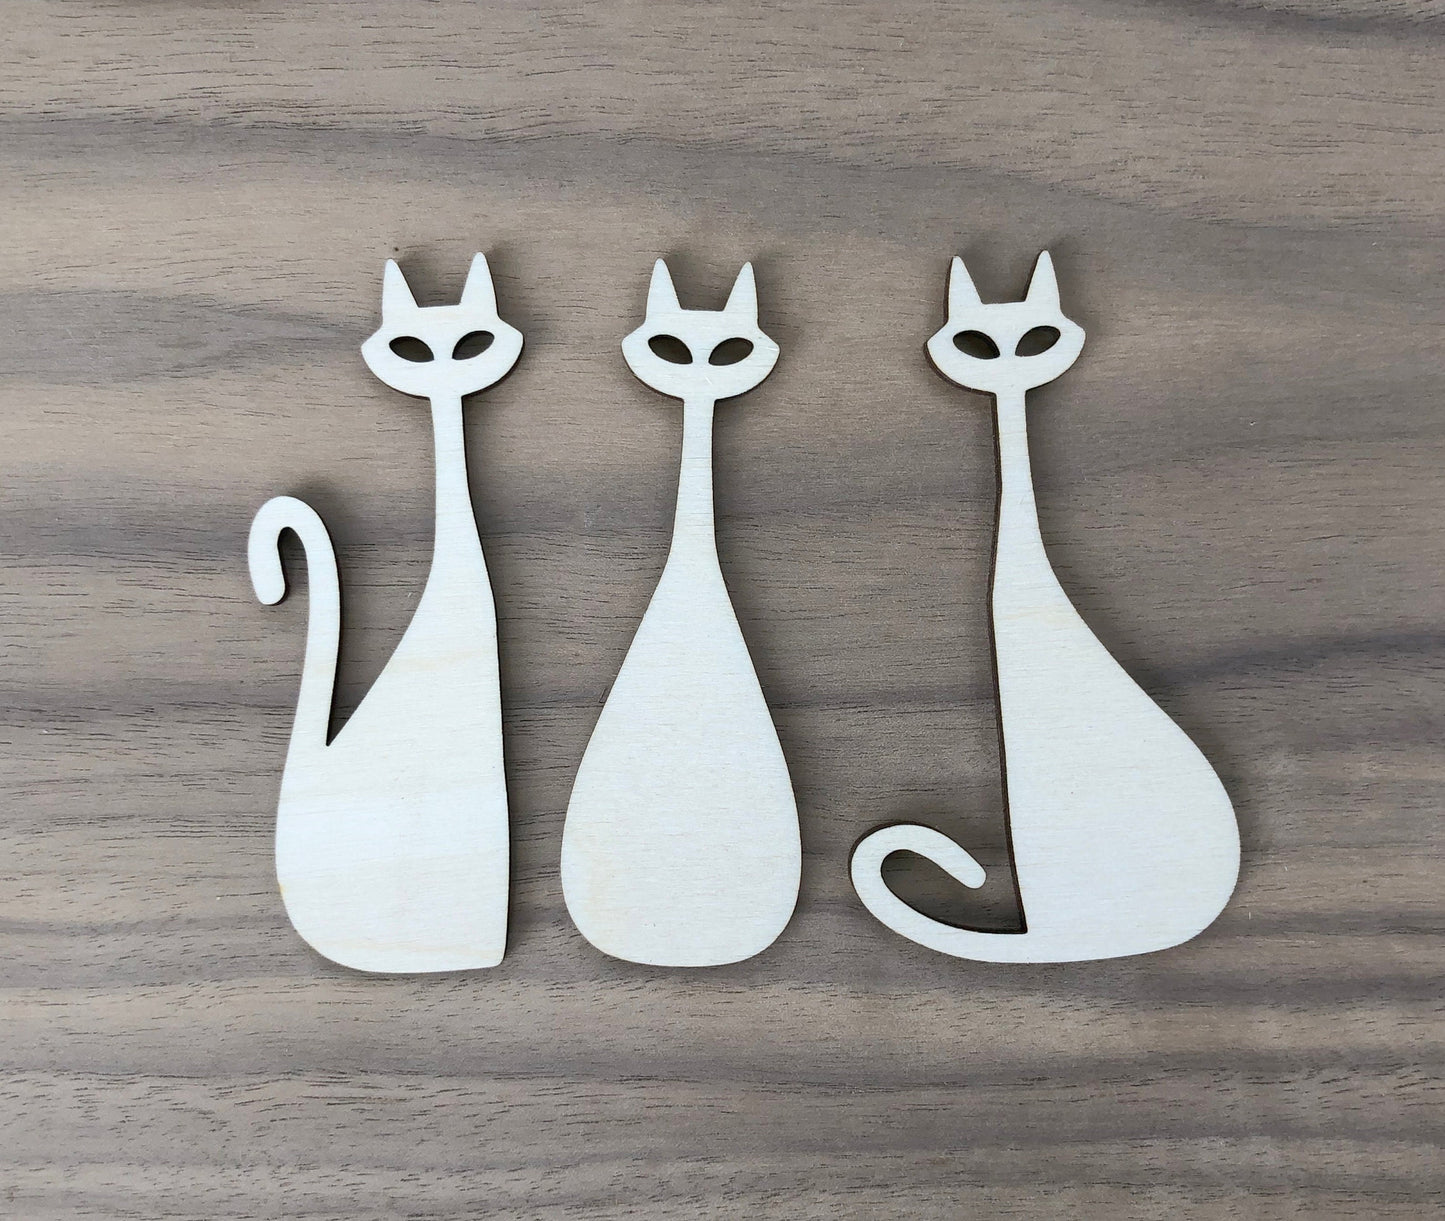 Three Mid Century Modern Wood Cat Shapes, Wooden Cat Cutout, DIY Craft Supplies, Blank Shapes, Many Sizes